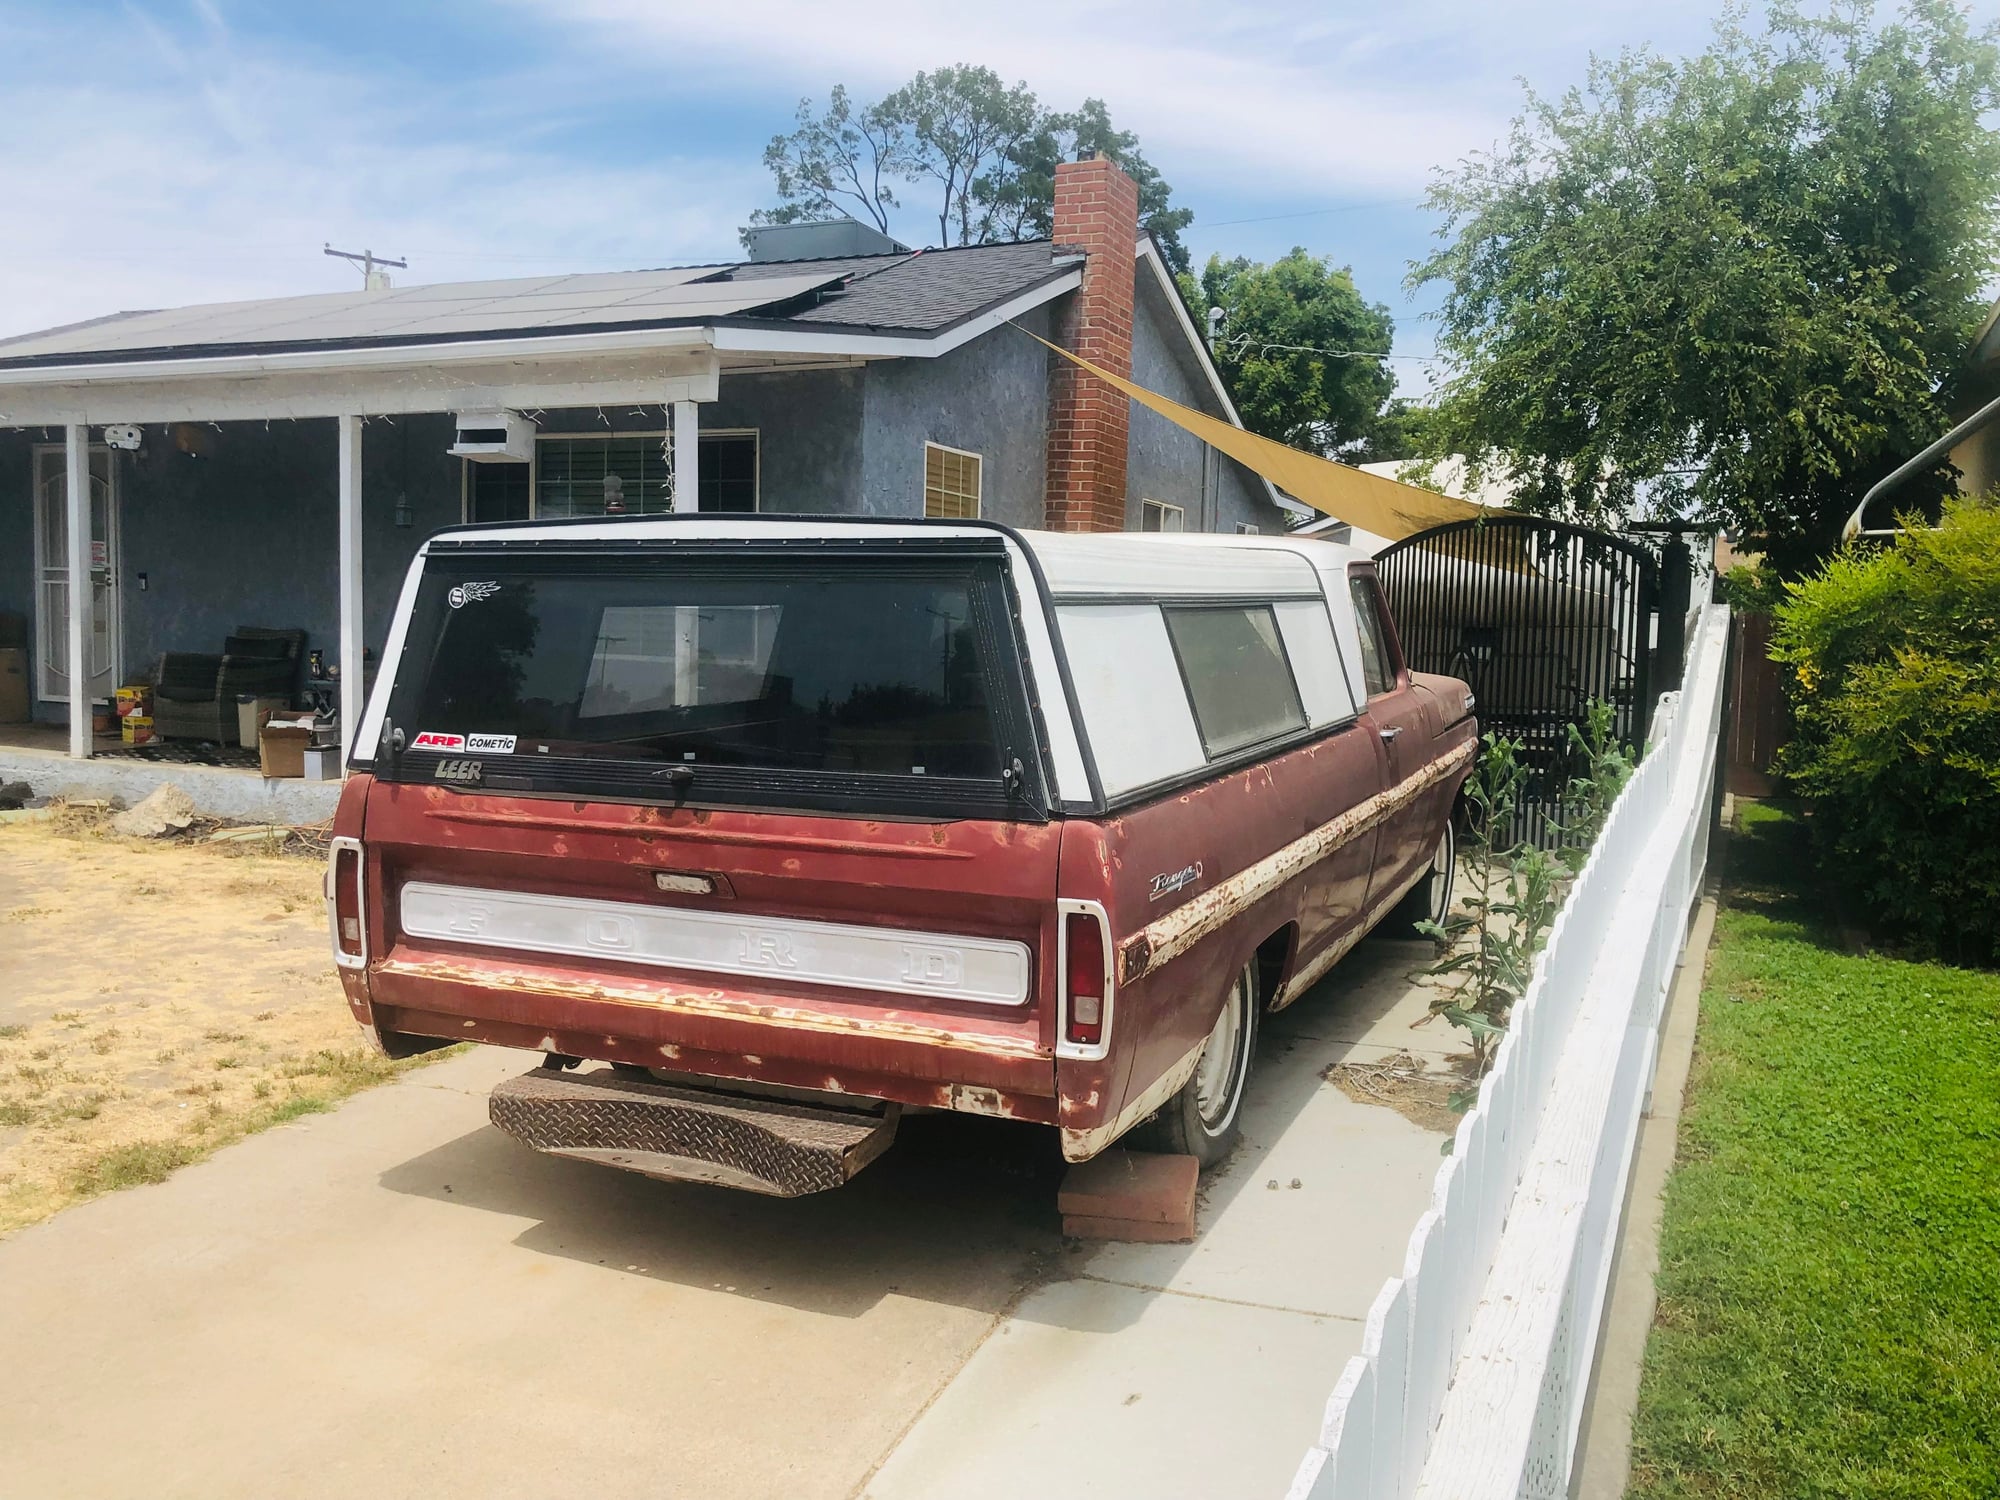 1971 Ford F-100 - f100 parts complete project sell or trade - Used - VIN f10yrk07516 - 8 cyl - 2WD - Automatic - Truck - Red - Fresno, CA 93703, United States